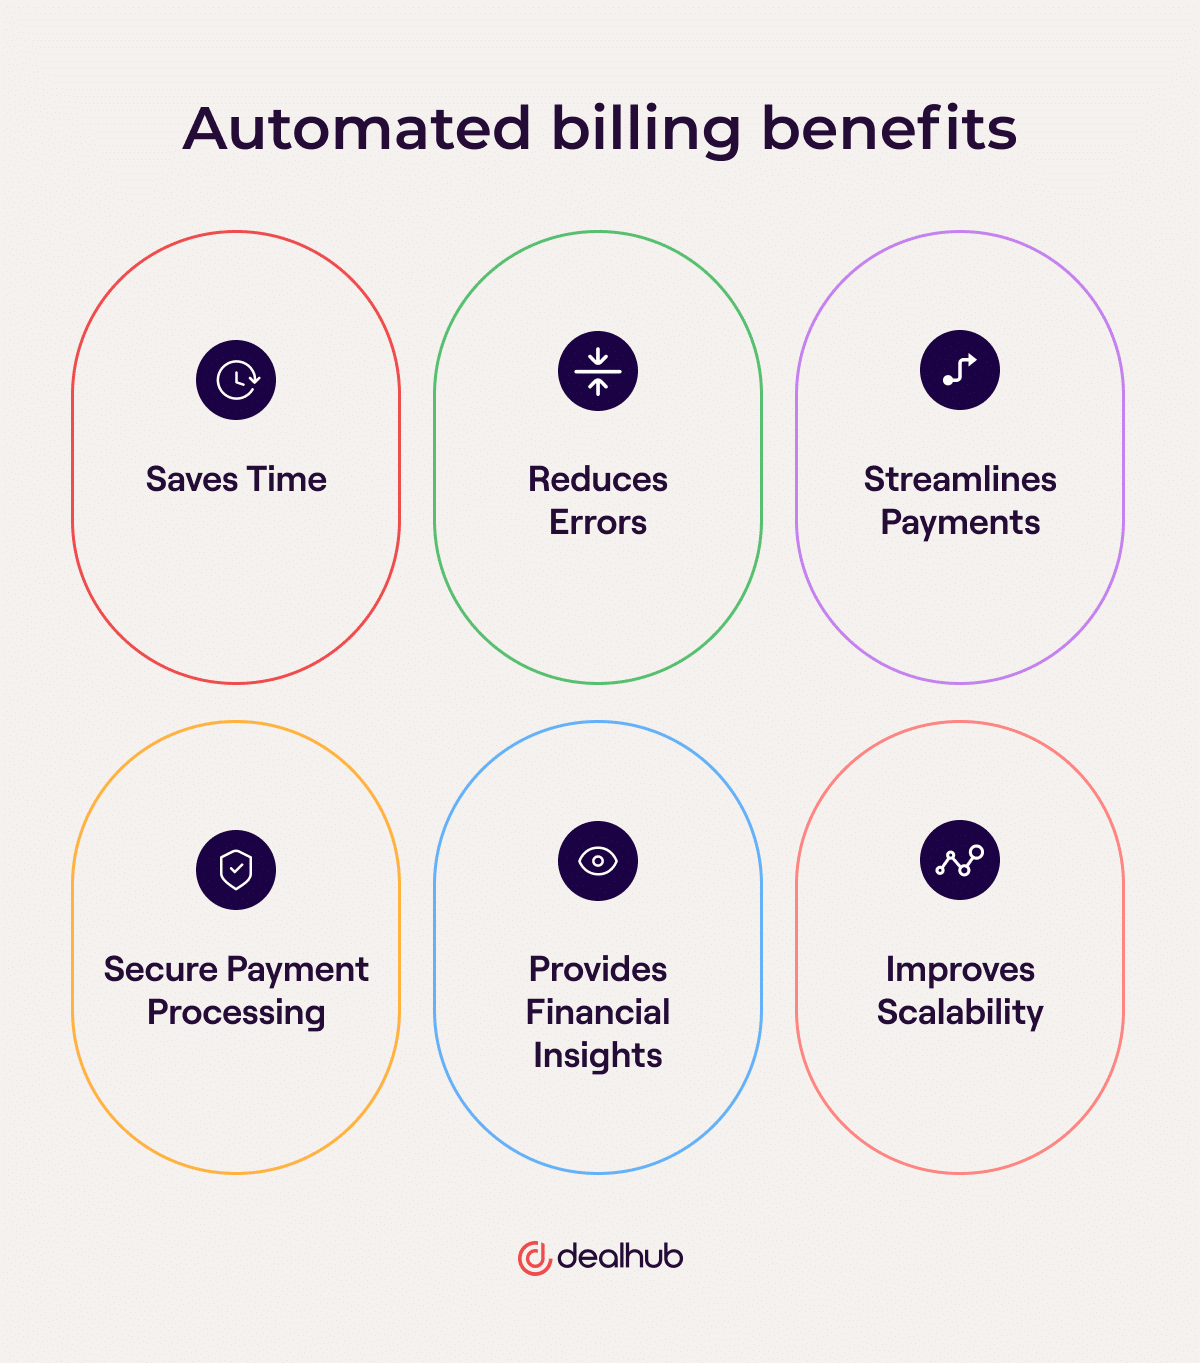 Benefits of Automated Billing